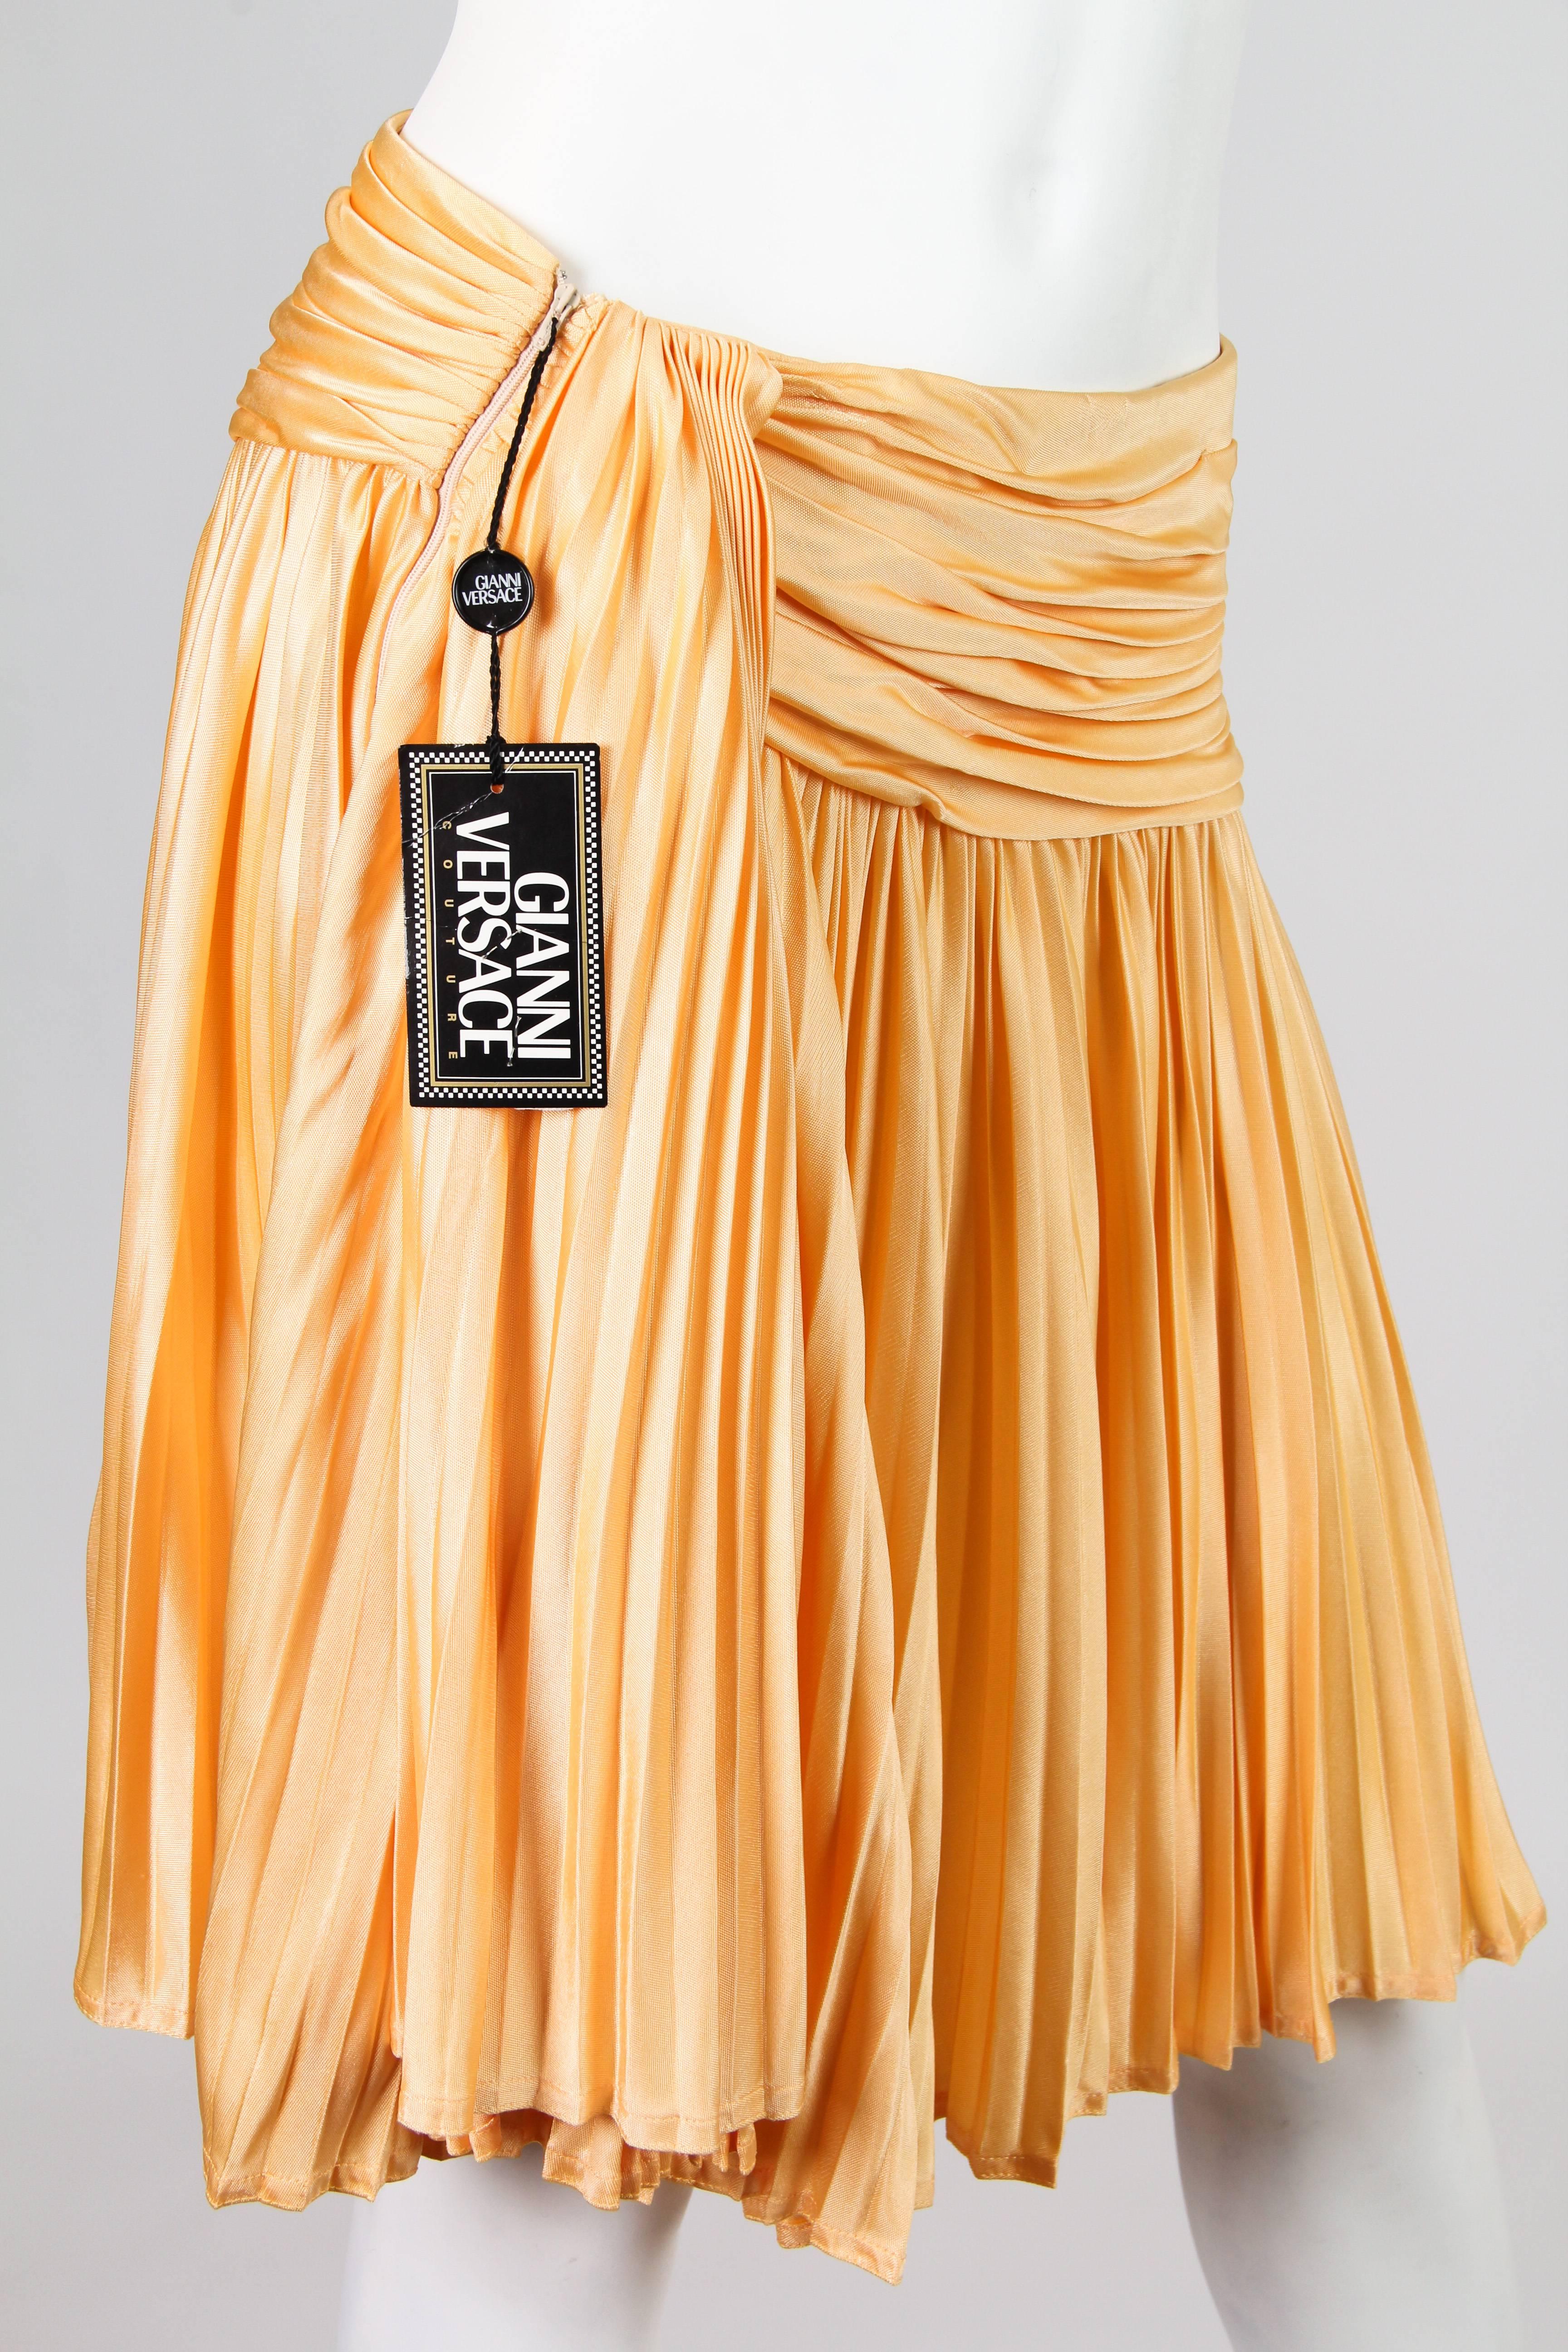 1990S GIANNI VERSACE Buttercream Yellow Rayon Jersey Mini Skirt With Slit For Sale 4